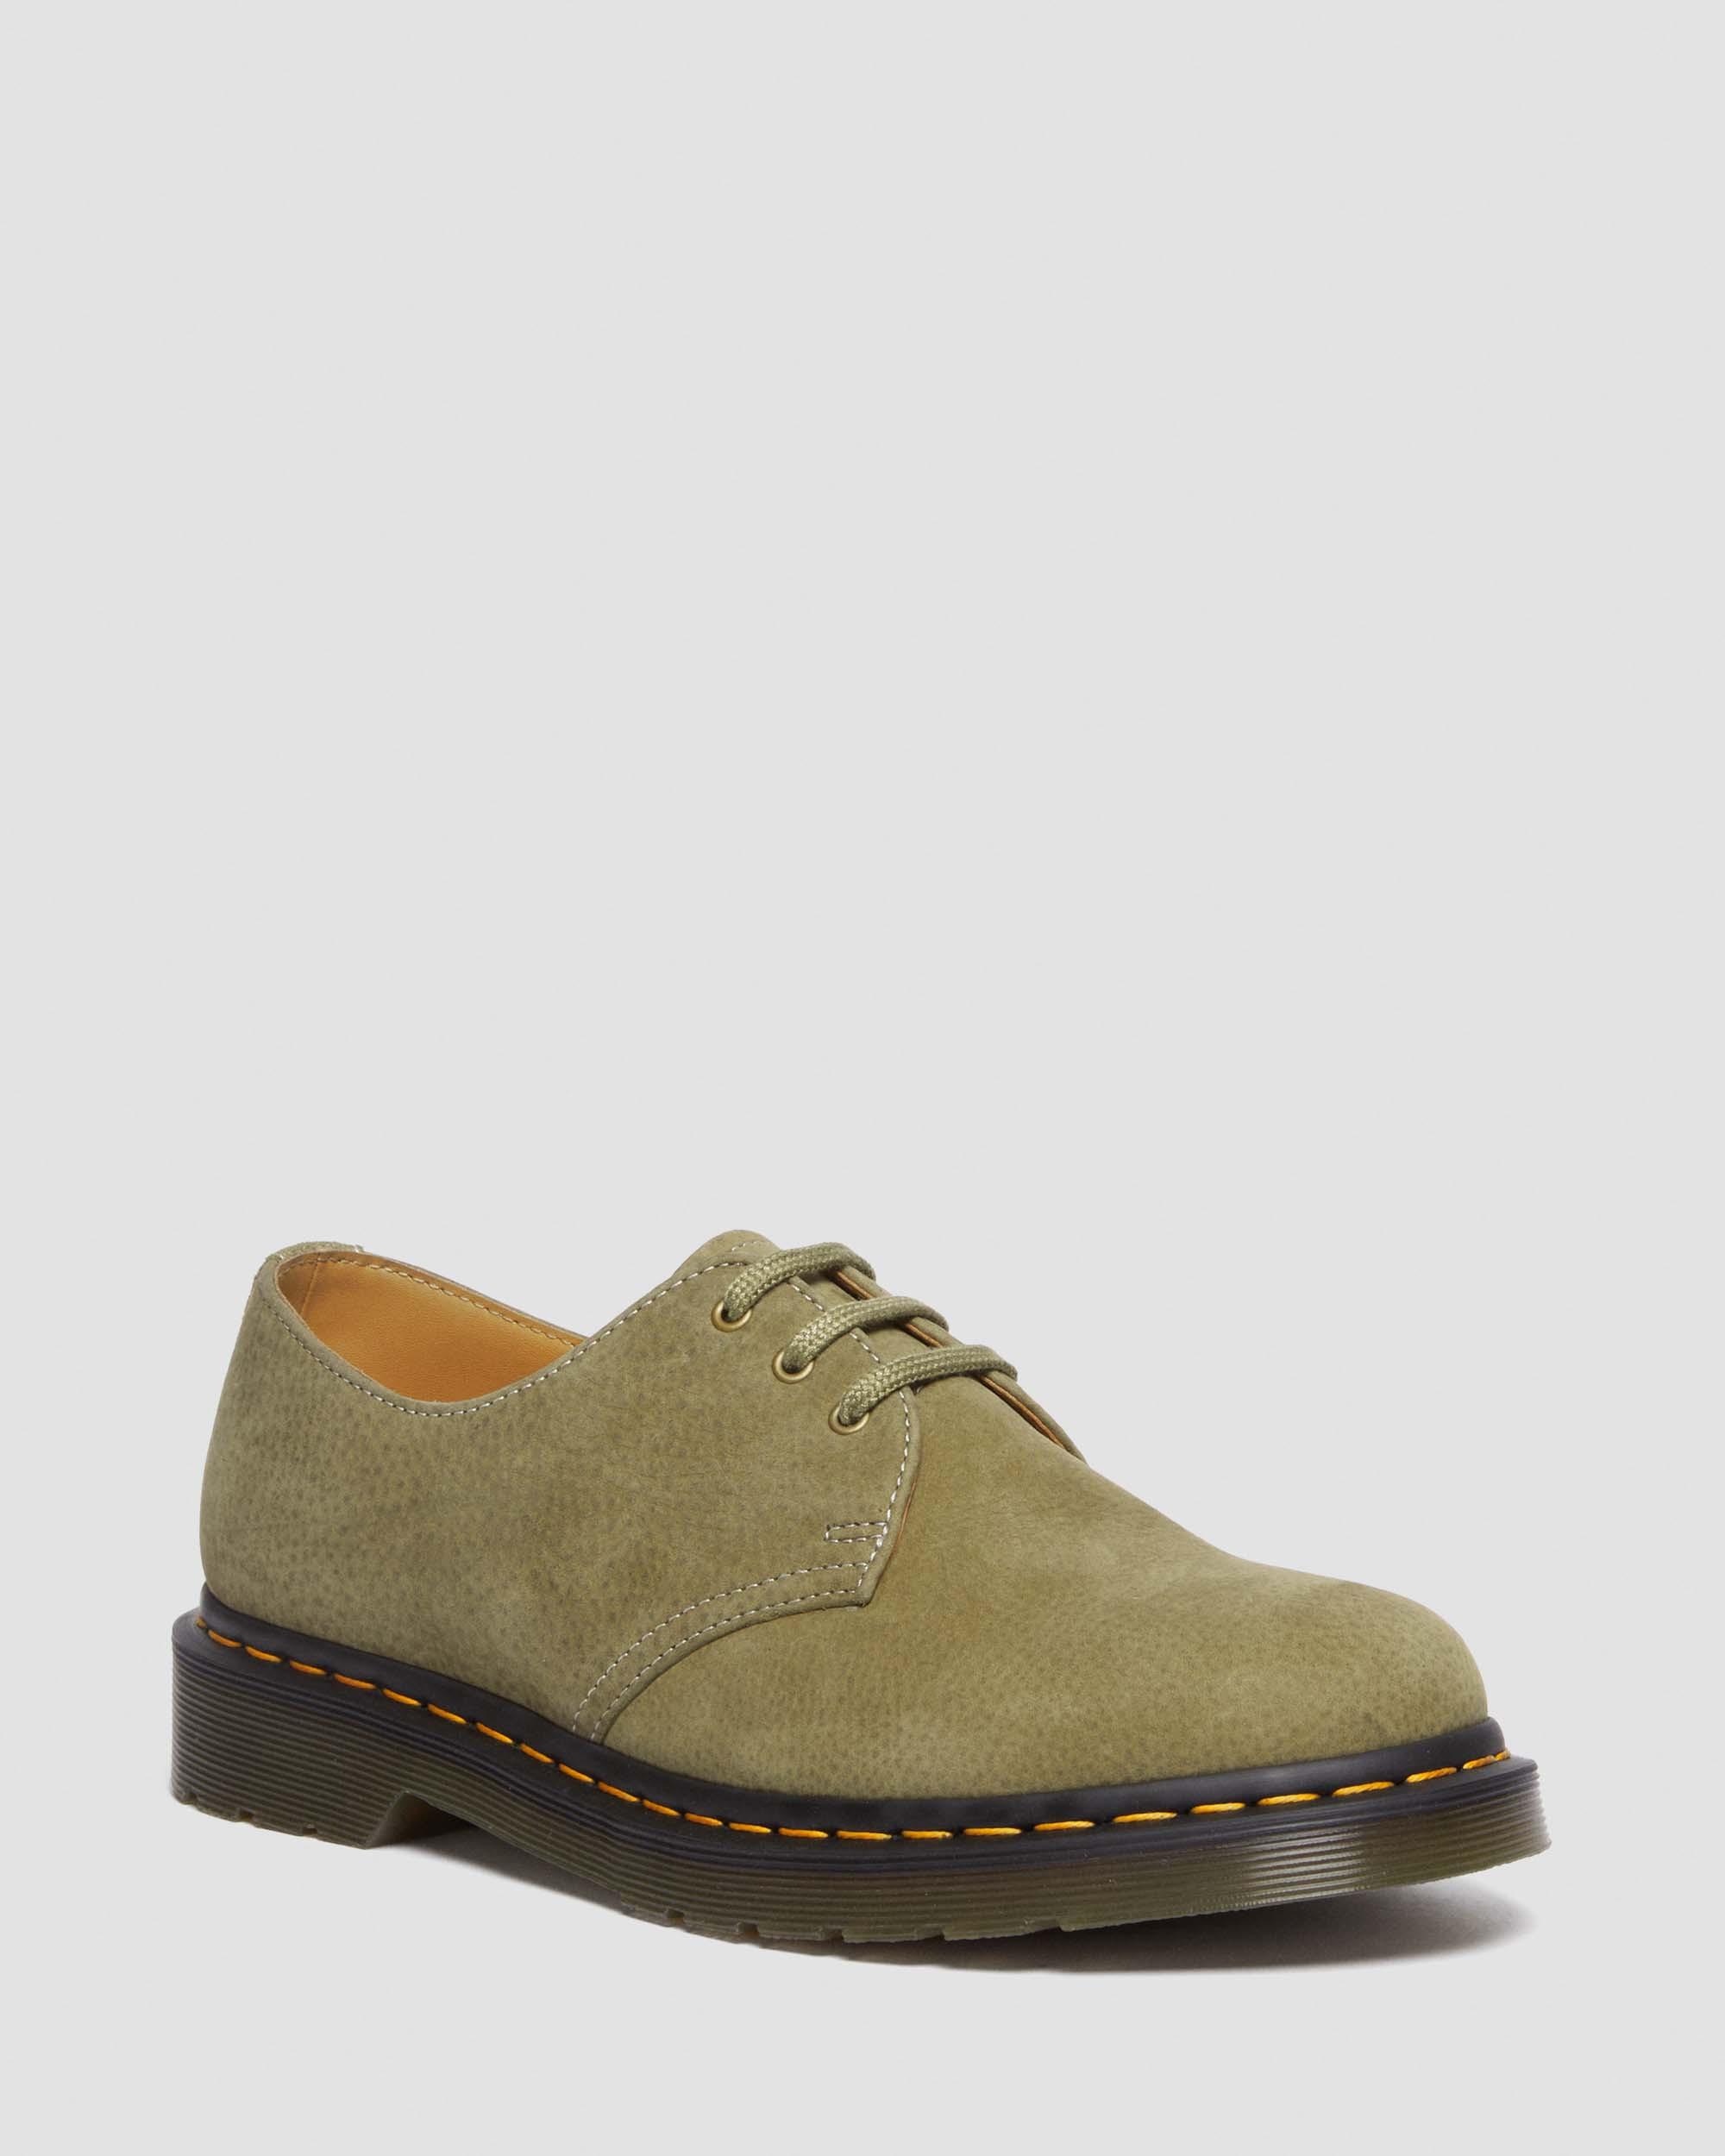 Dr. Martens' 1461 Tumbled Nubuck Leather Oxford Shoes In Grün